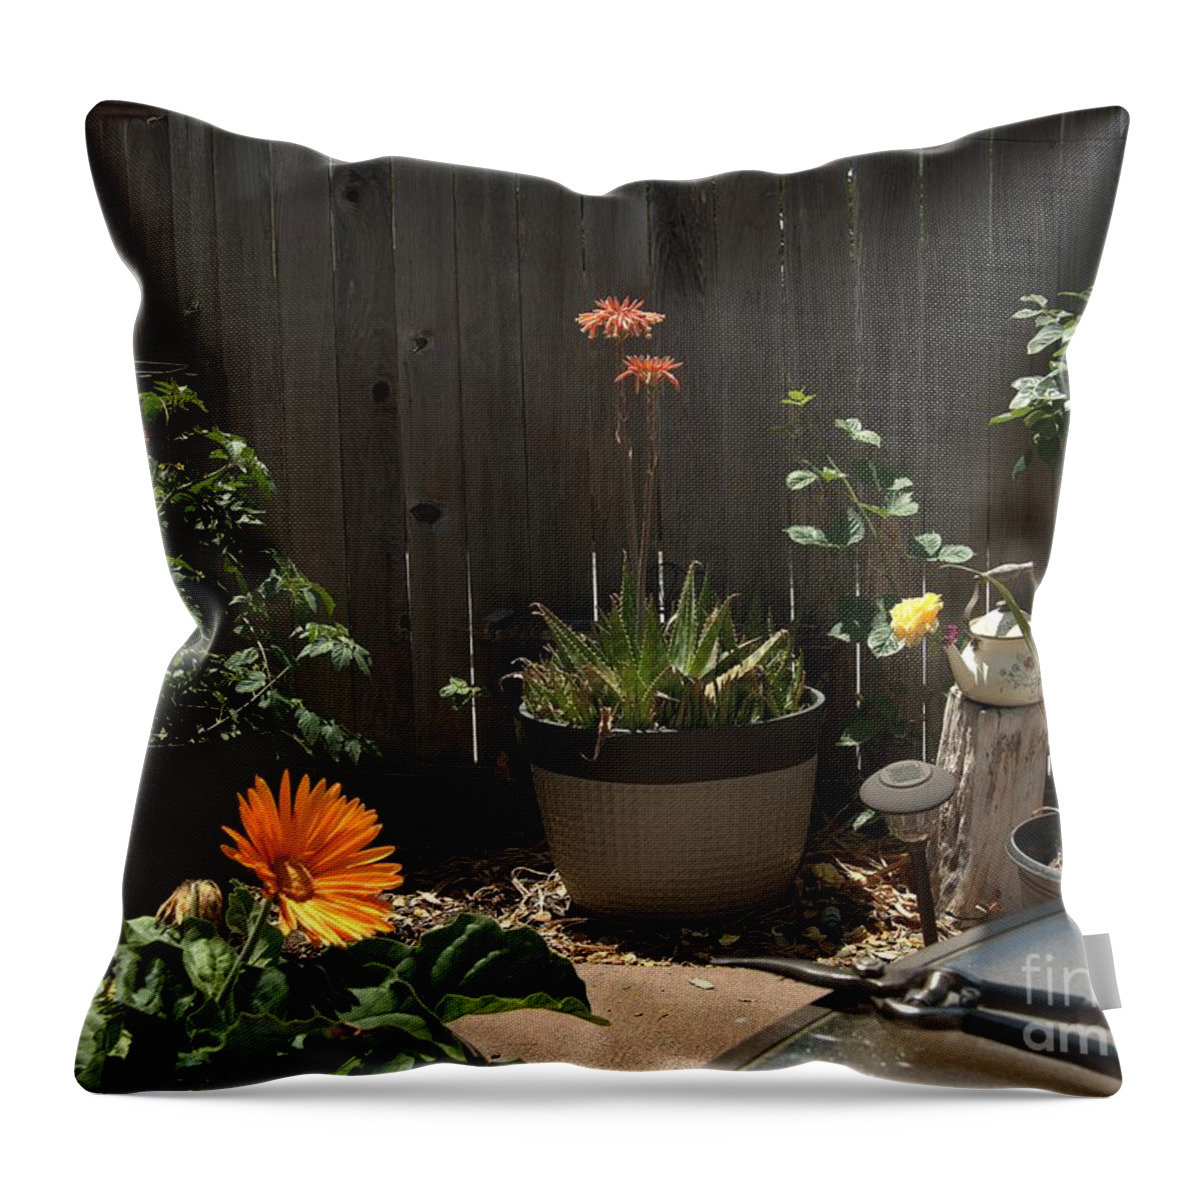 Still Life Throw Pillow featuring the photograph Seize the Day by Richard Thomas